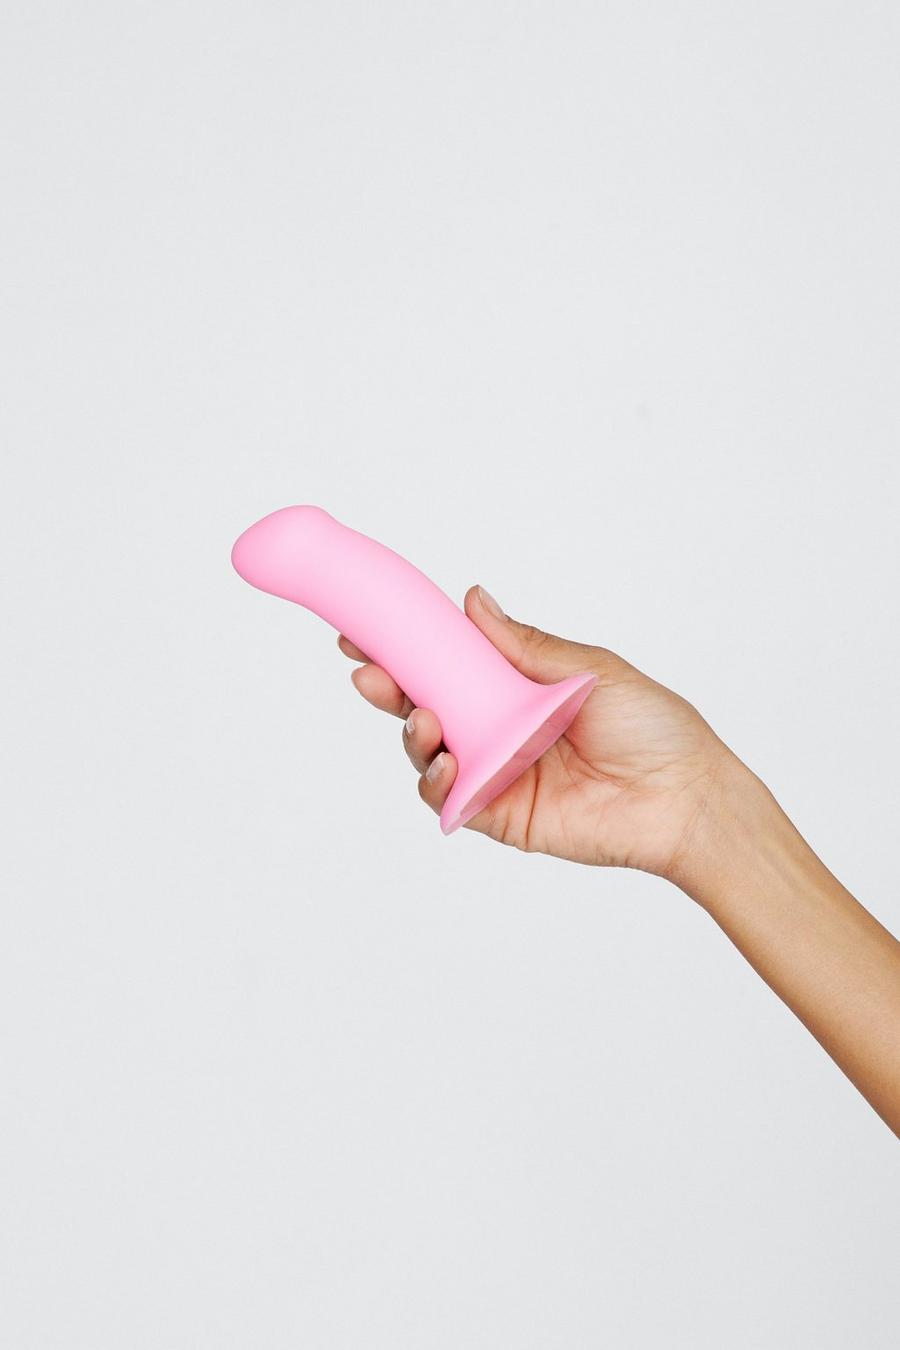 Tapered Suction Base Dildo